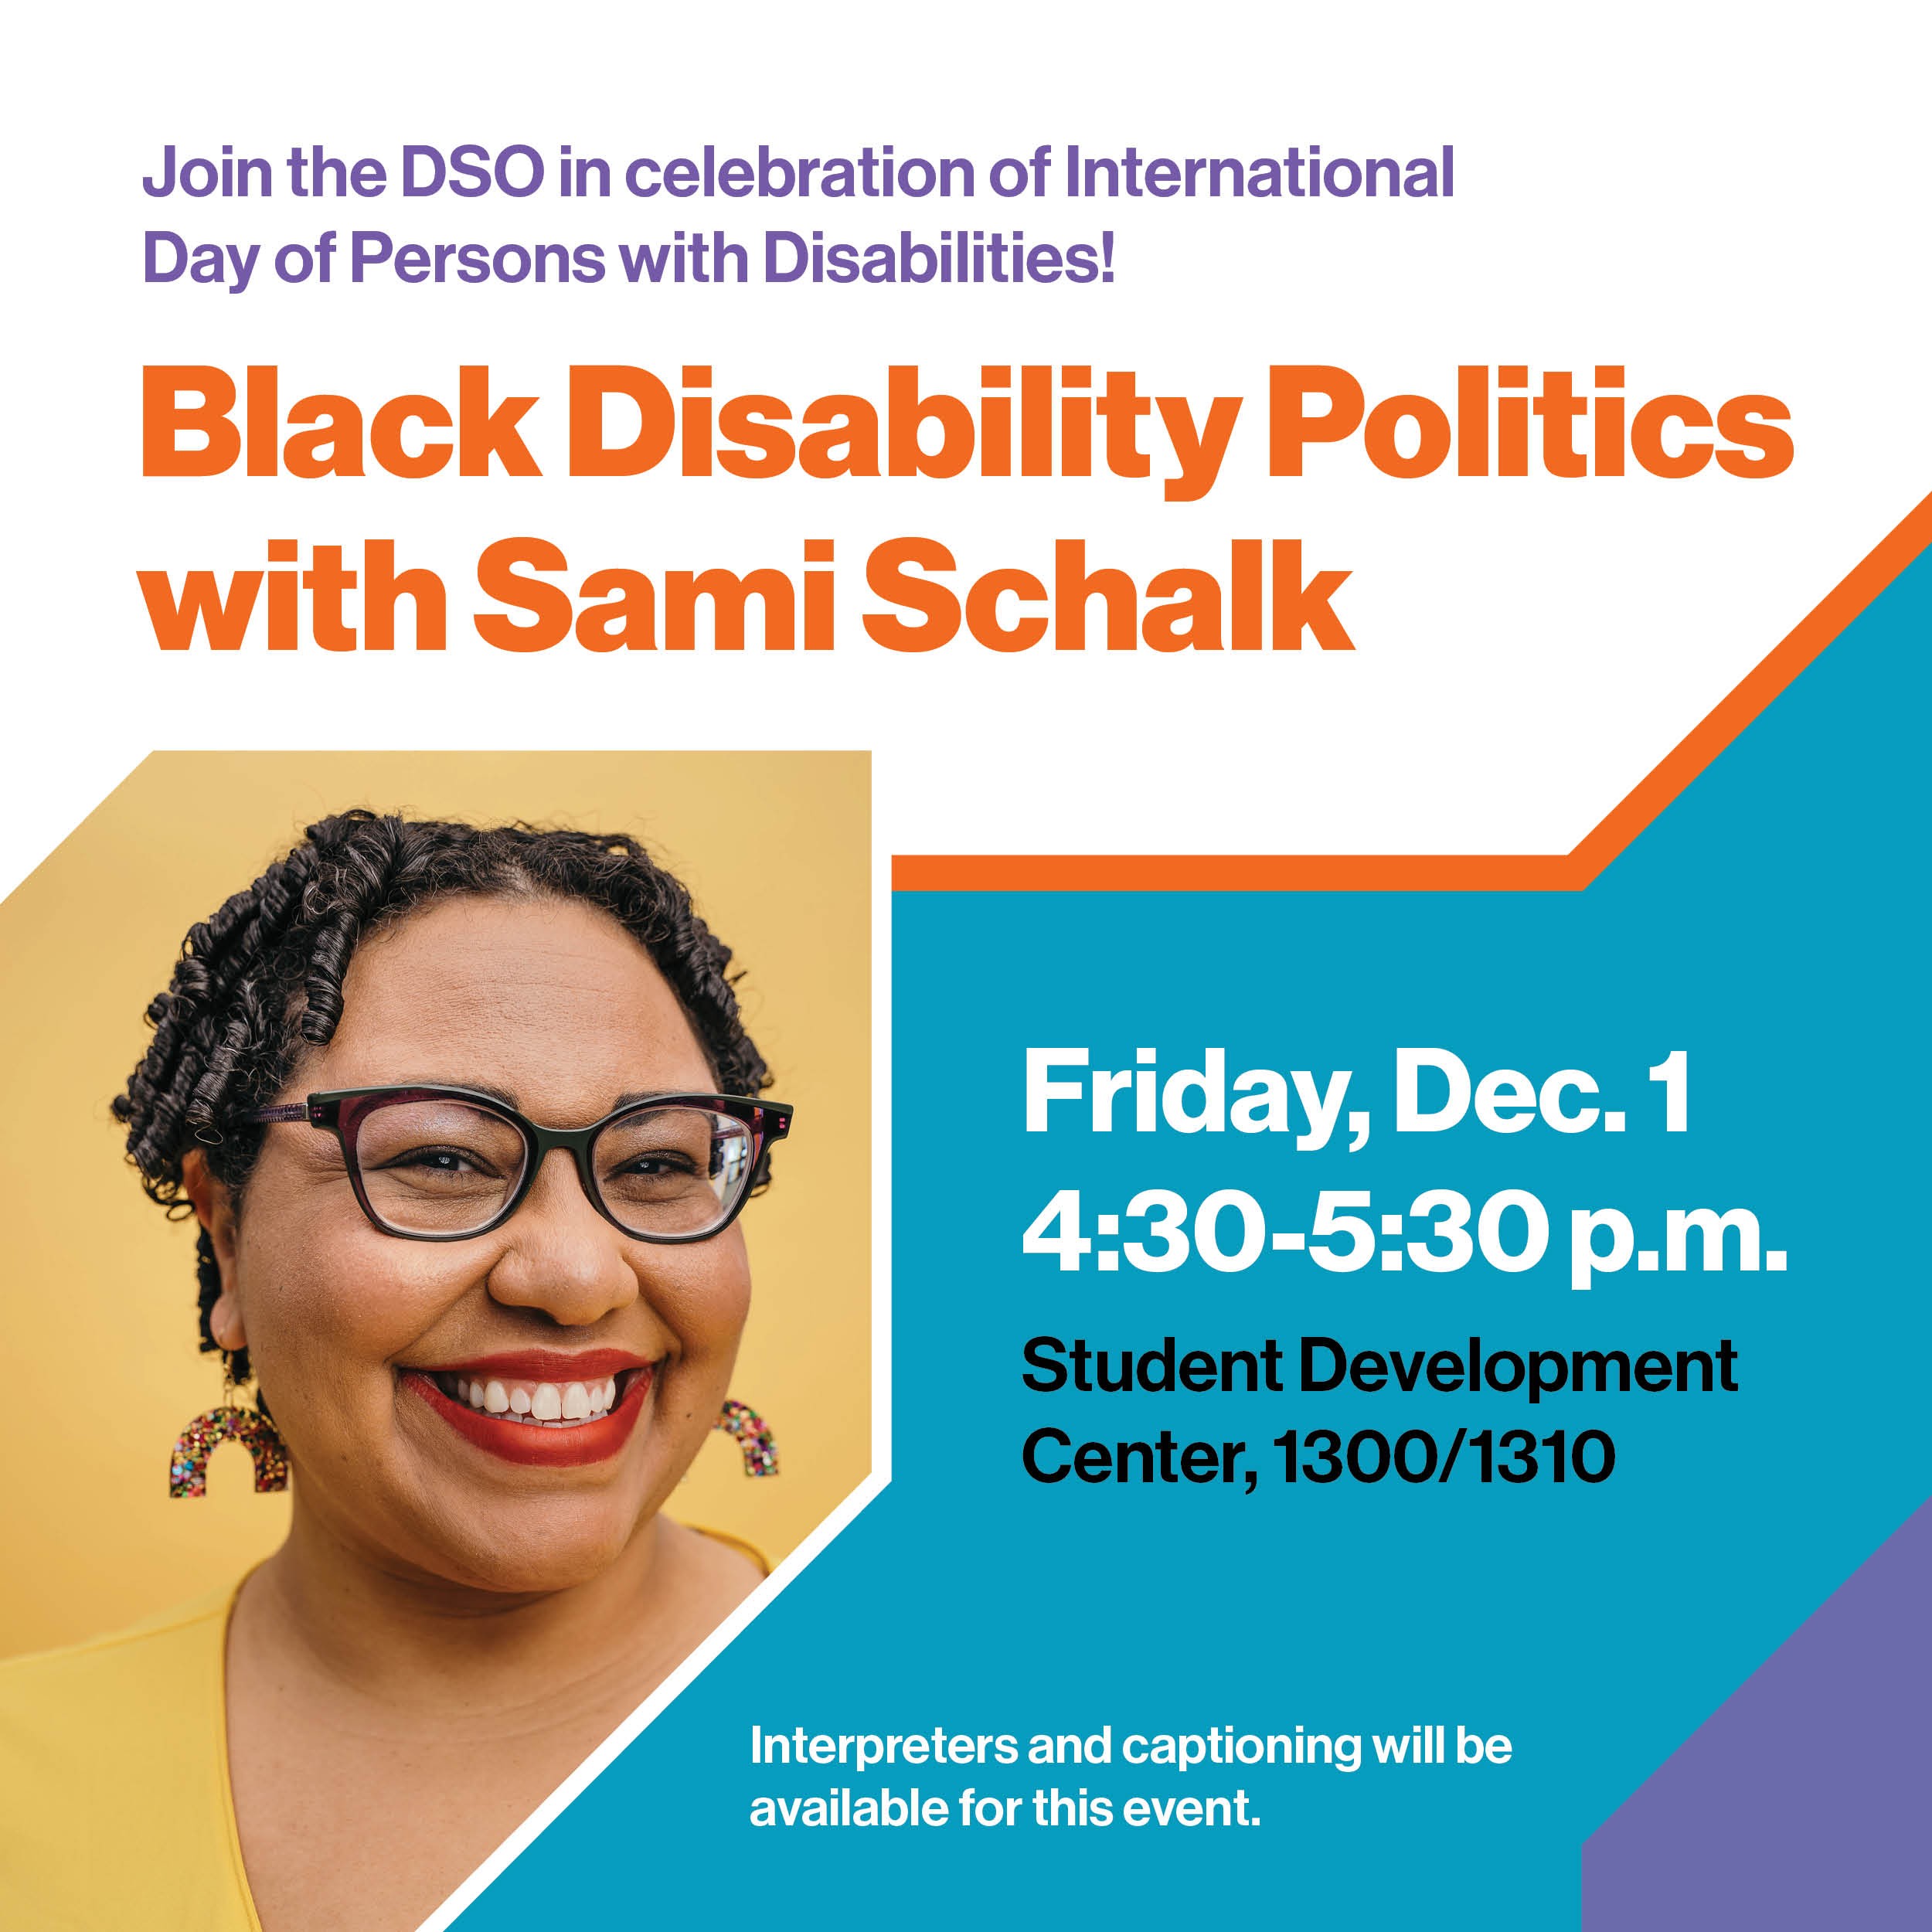 Join the DSO in celebration of International Day of Persons with Disabilities! Black Disability Politics with Sami Schalk Friday, Dec. 1 4:30-5:30 p.m. Student Development Center, 1300/1310 Interpreters and captioning will be available for this event.